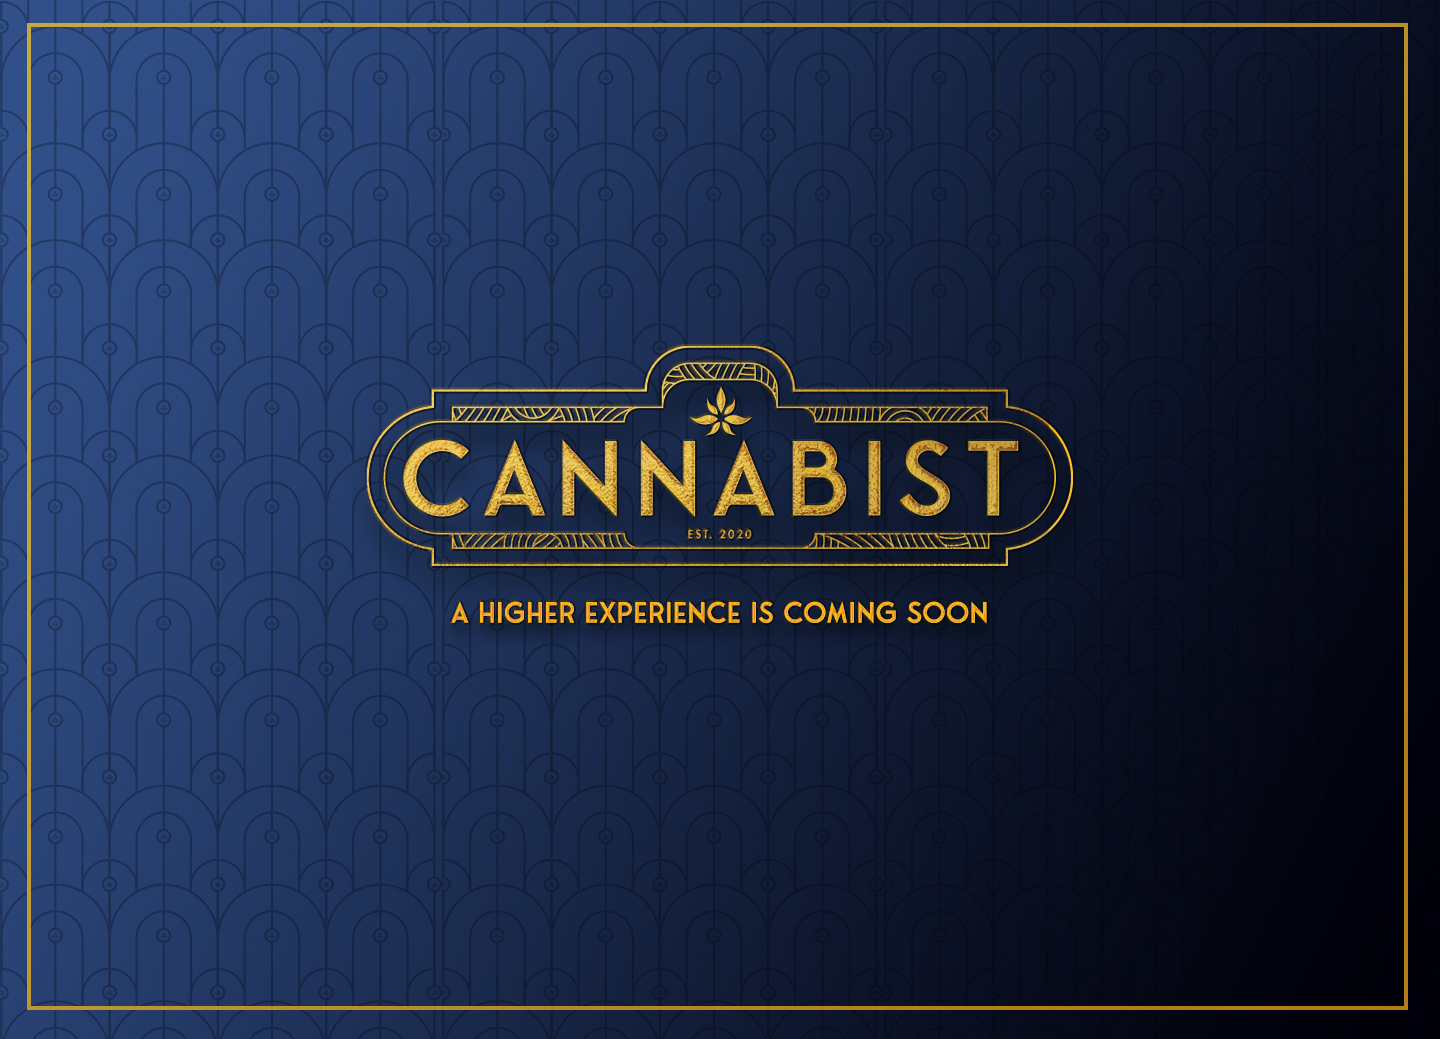 Cannabist - A higher experience is coming soon